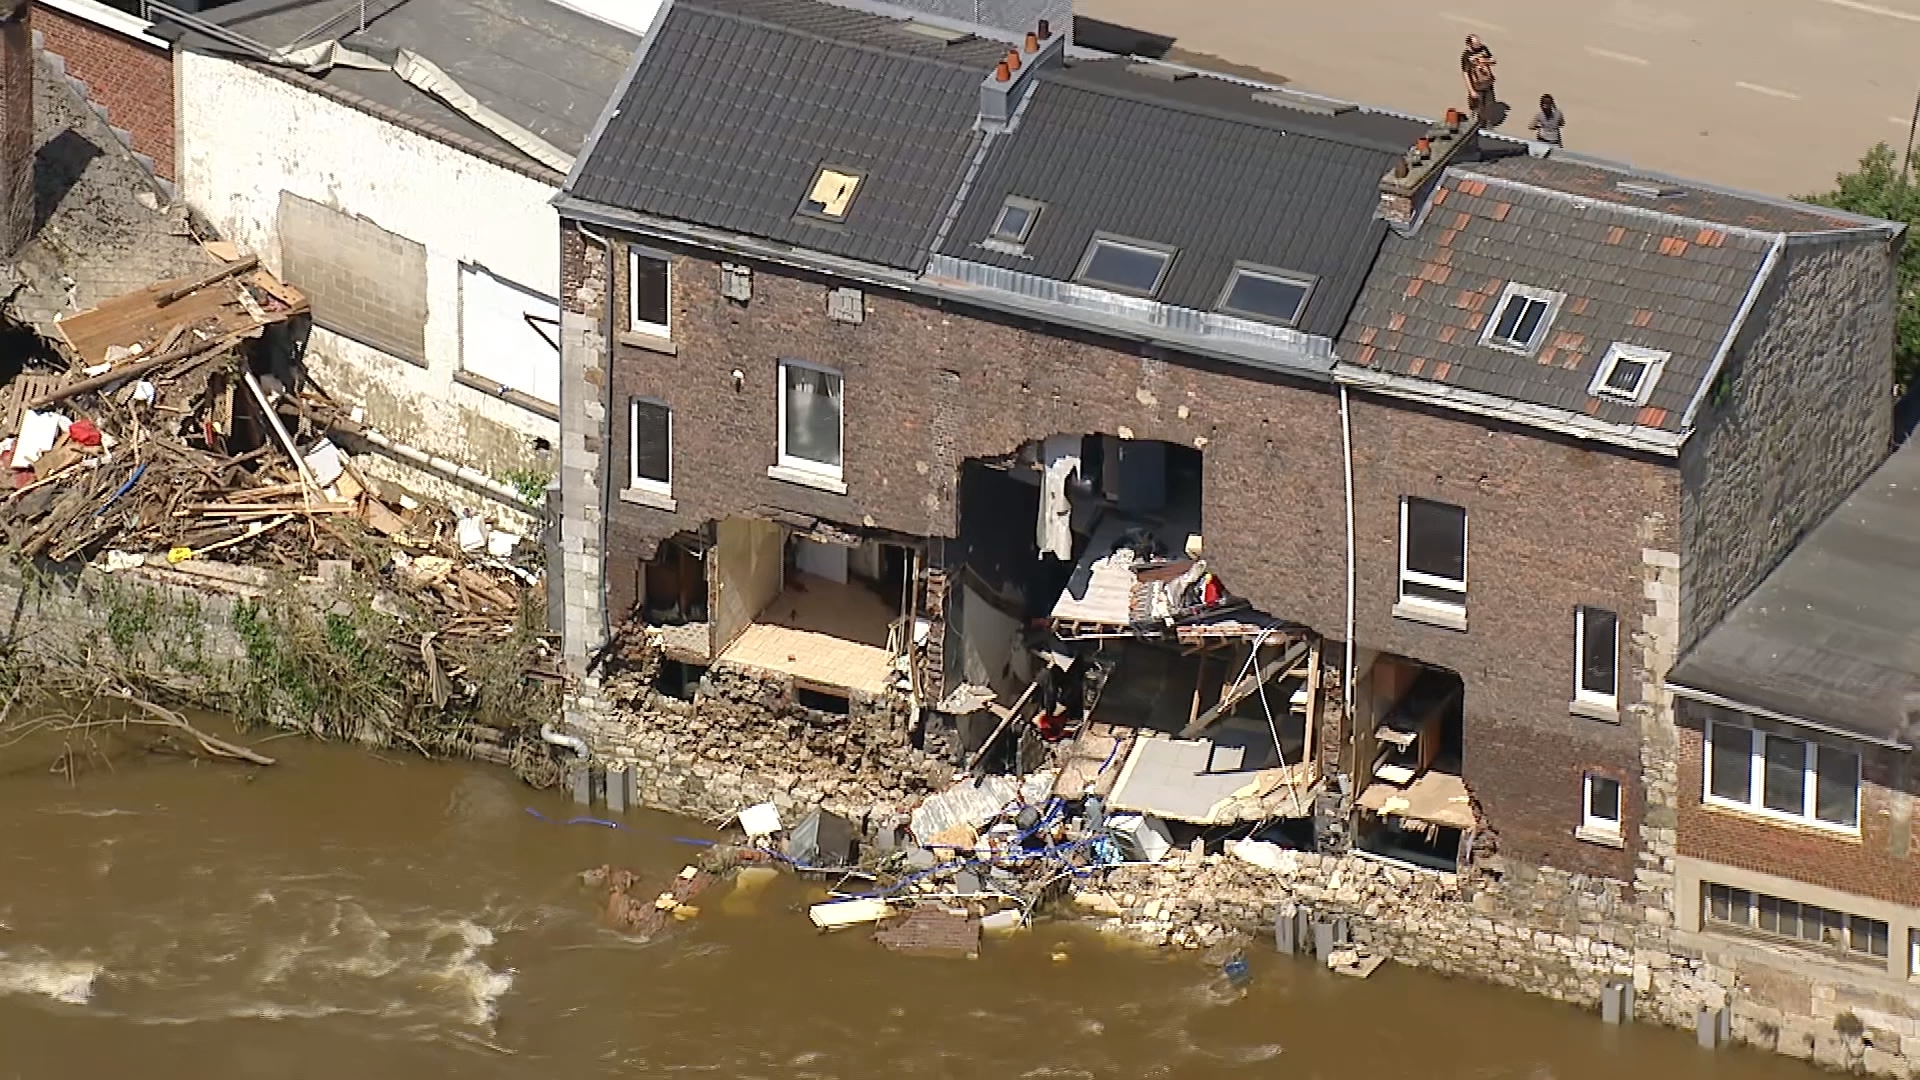 Footage shows damaged homes and debris-lined streets along river after ...